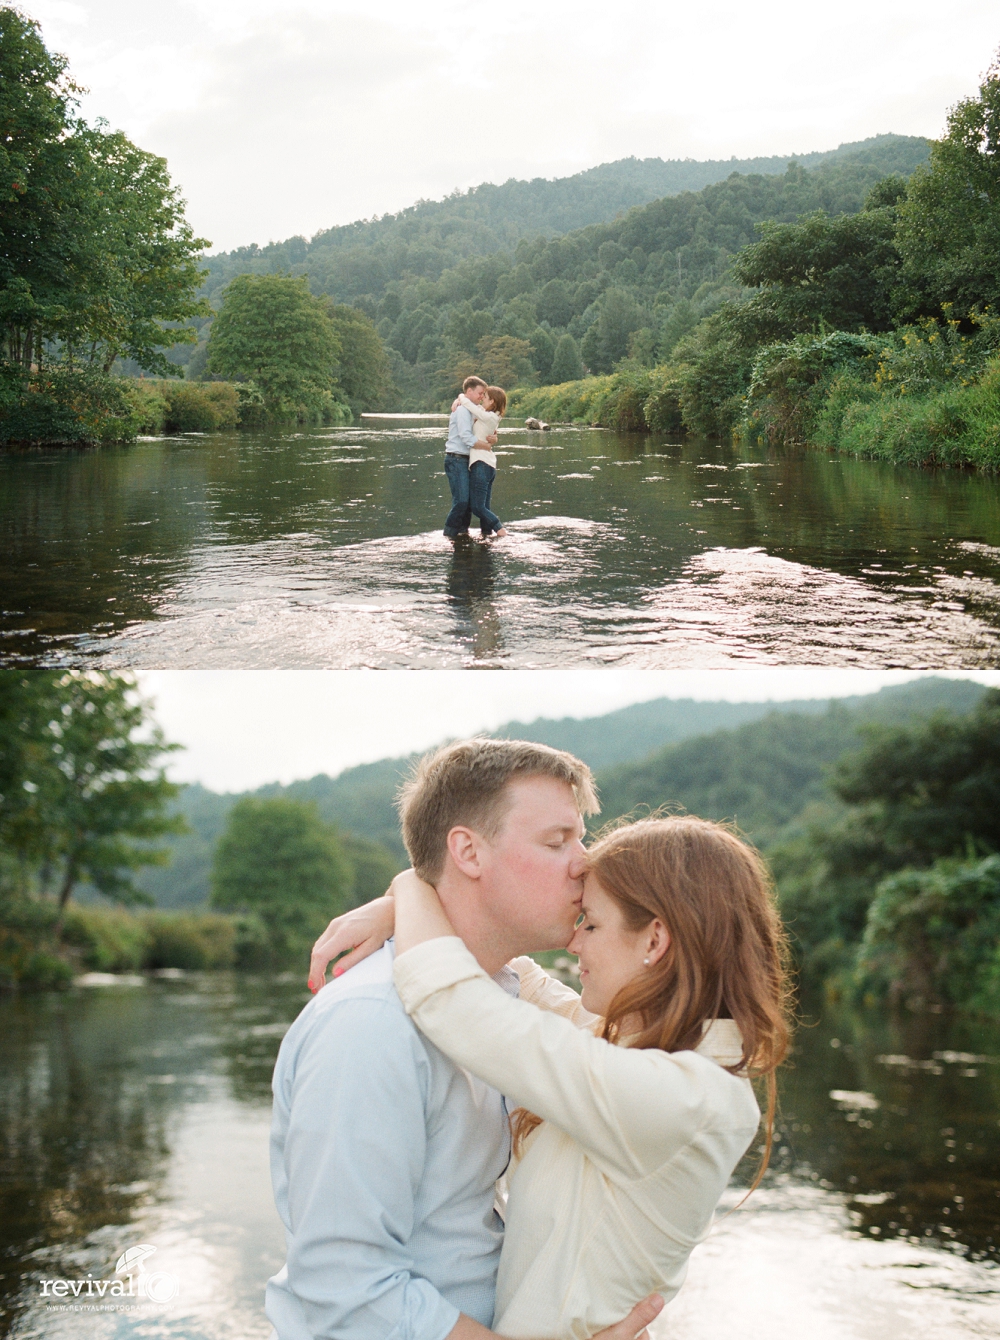 Katie + Carl: An Engagement Session on the River in Todd, NC Photos by NC Wedding Photographers Revival Photography www.revivalphotography.com